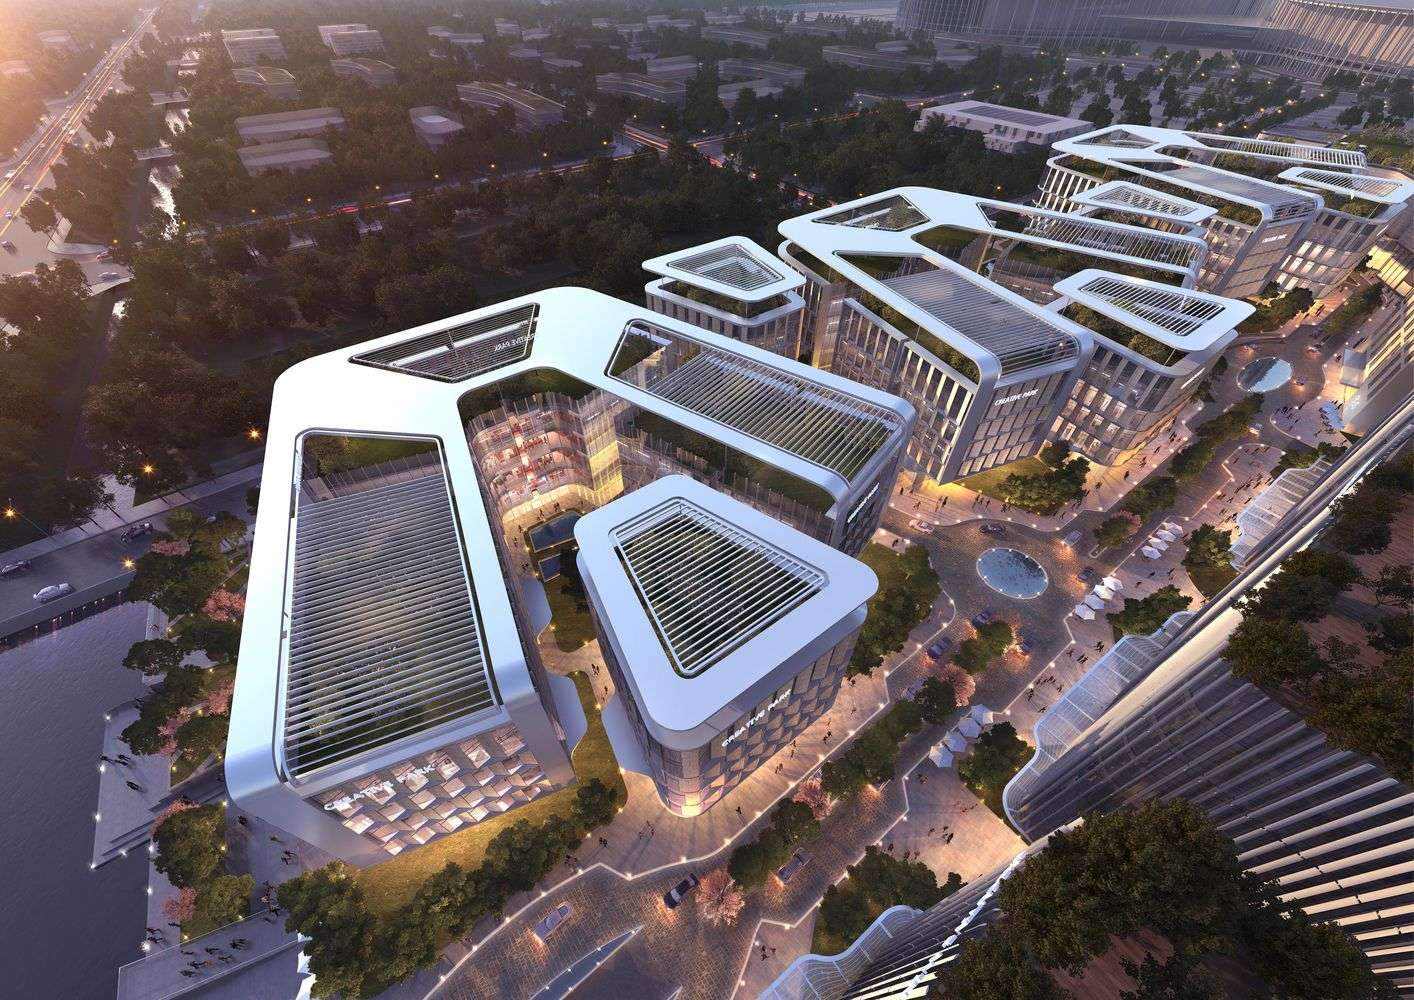 The development of the Garden City project in Shanghai by Aedas